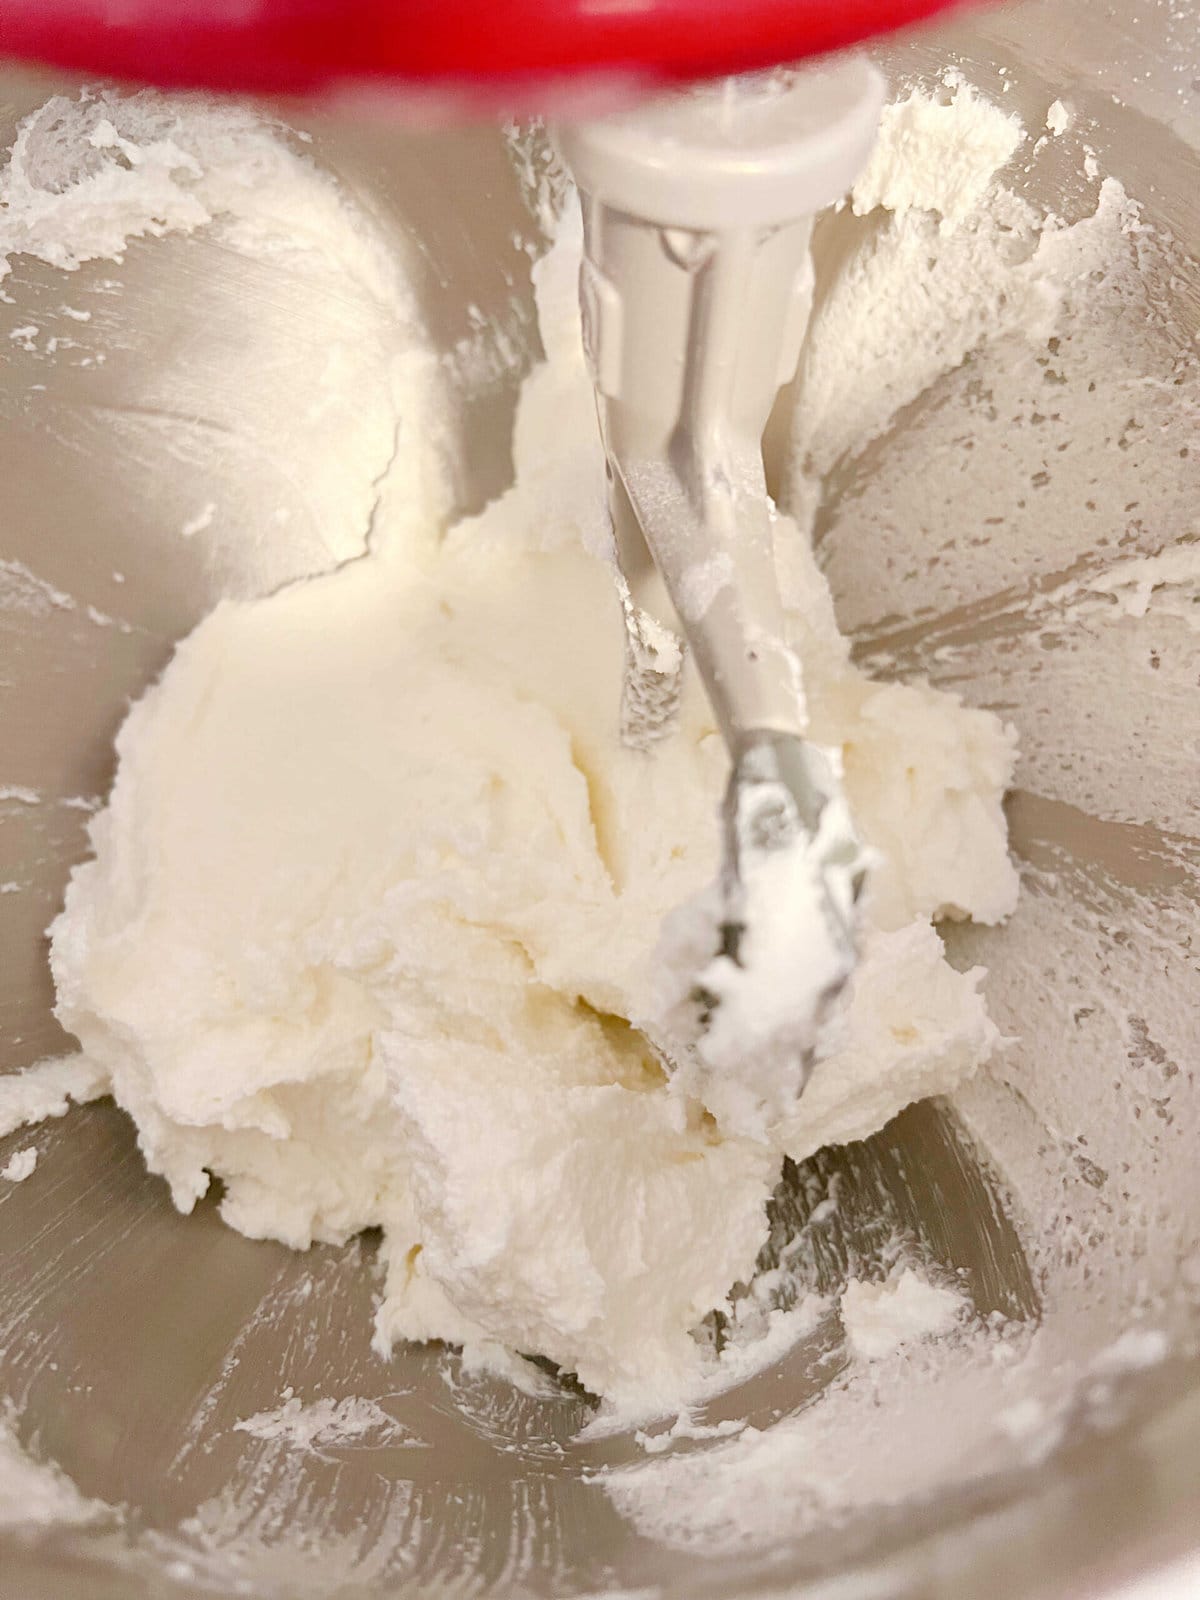 Butter and sugar mixture in a mixing bowl.